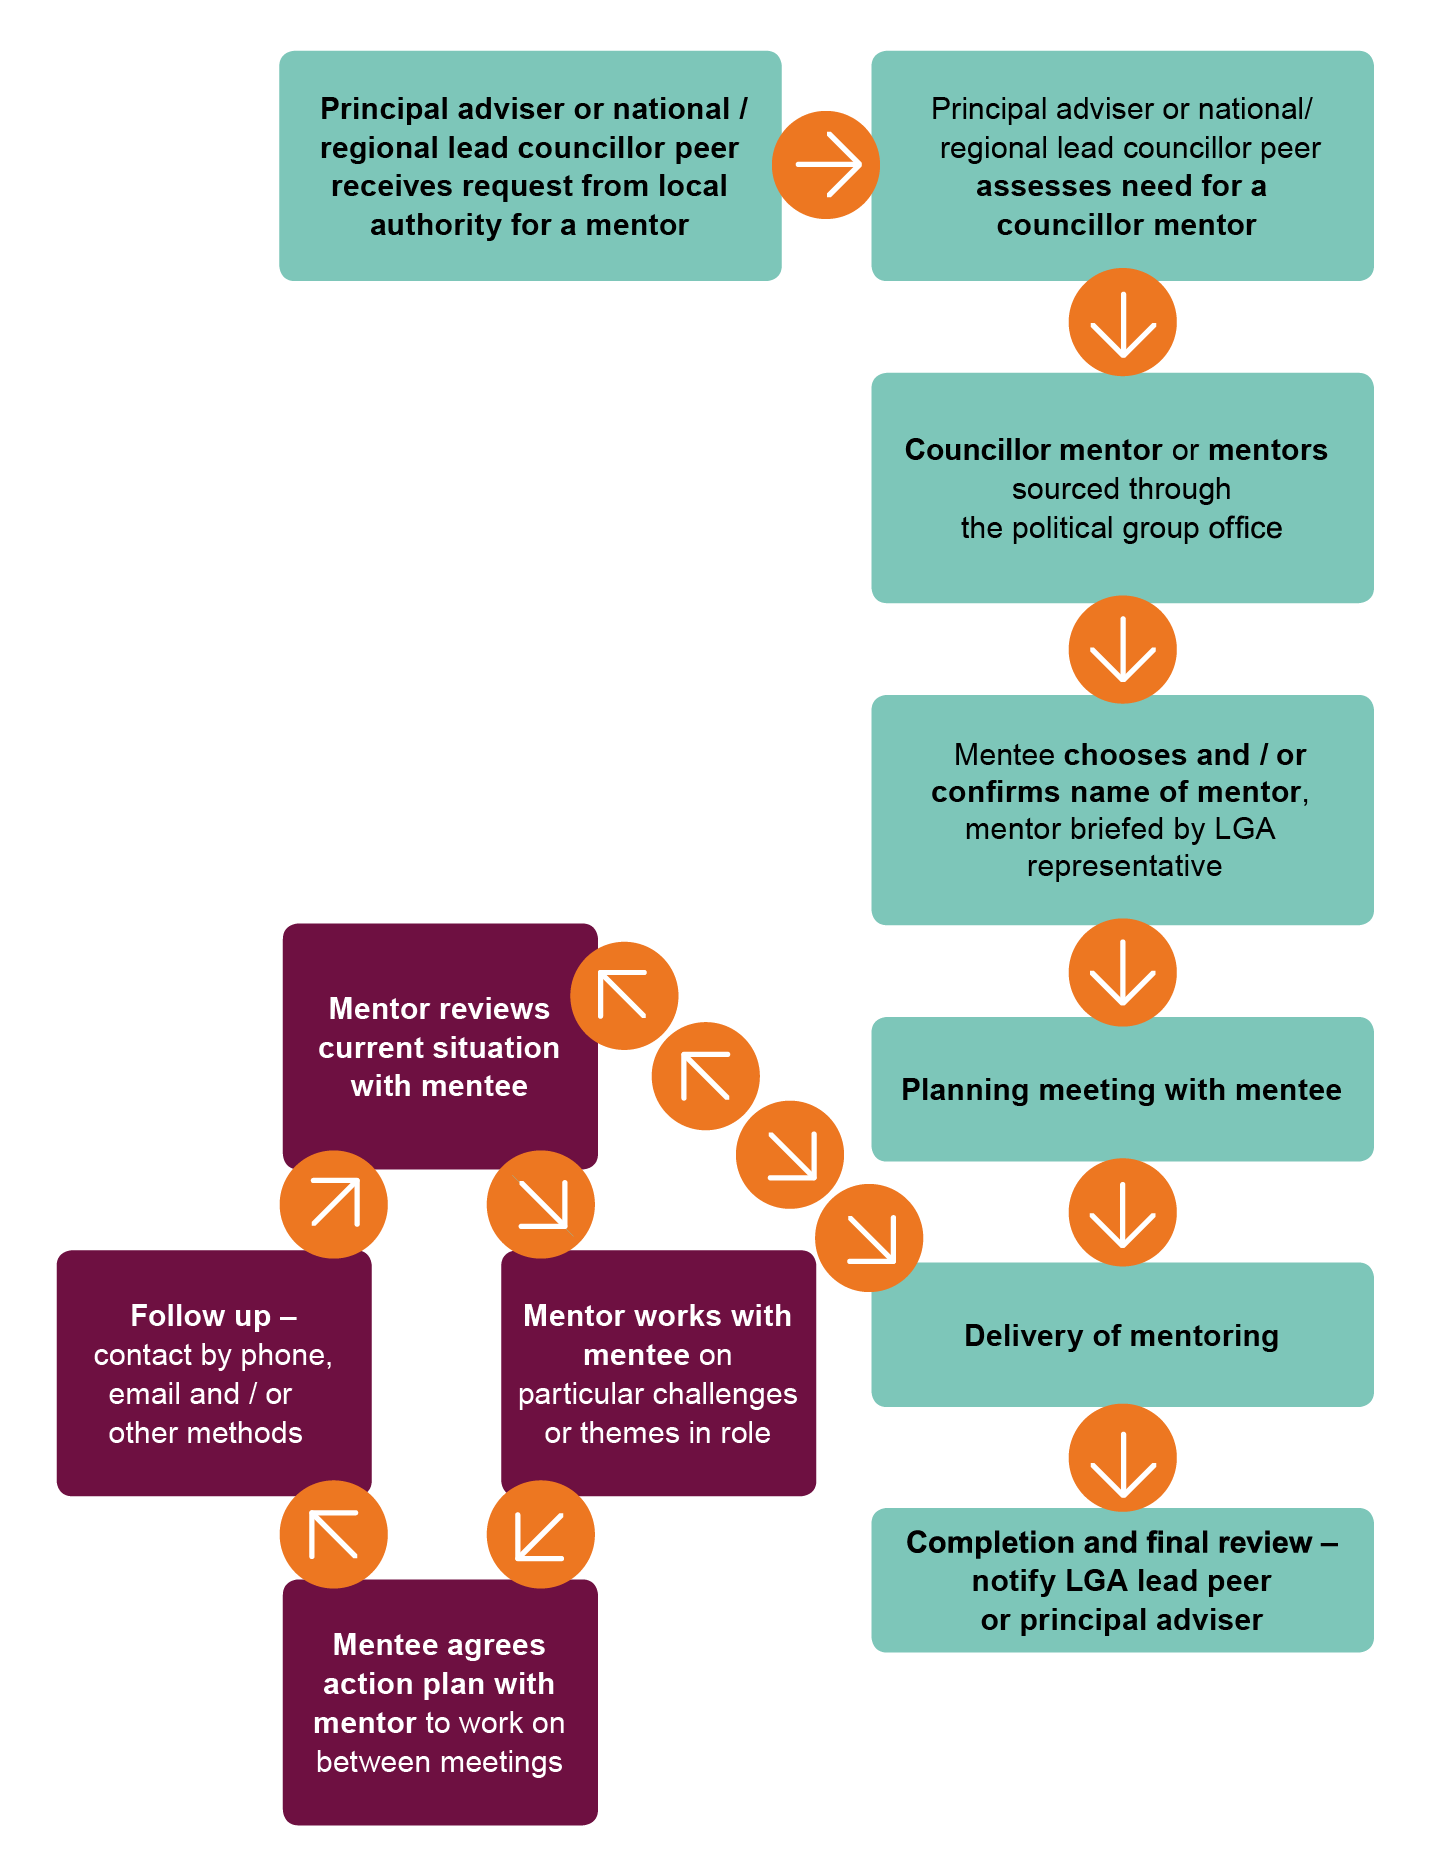 Graphic showing the peer mento commissioning process